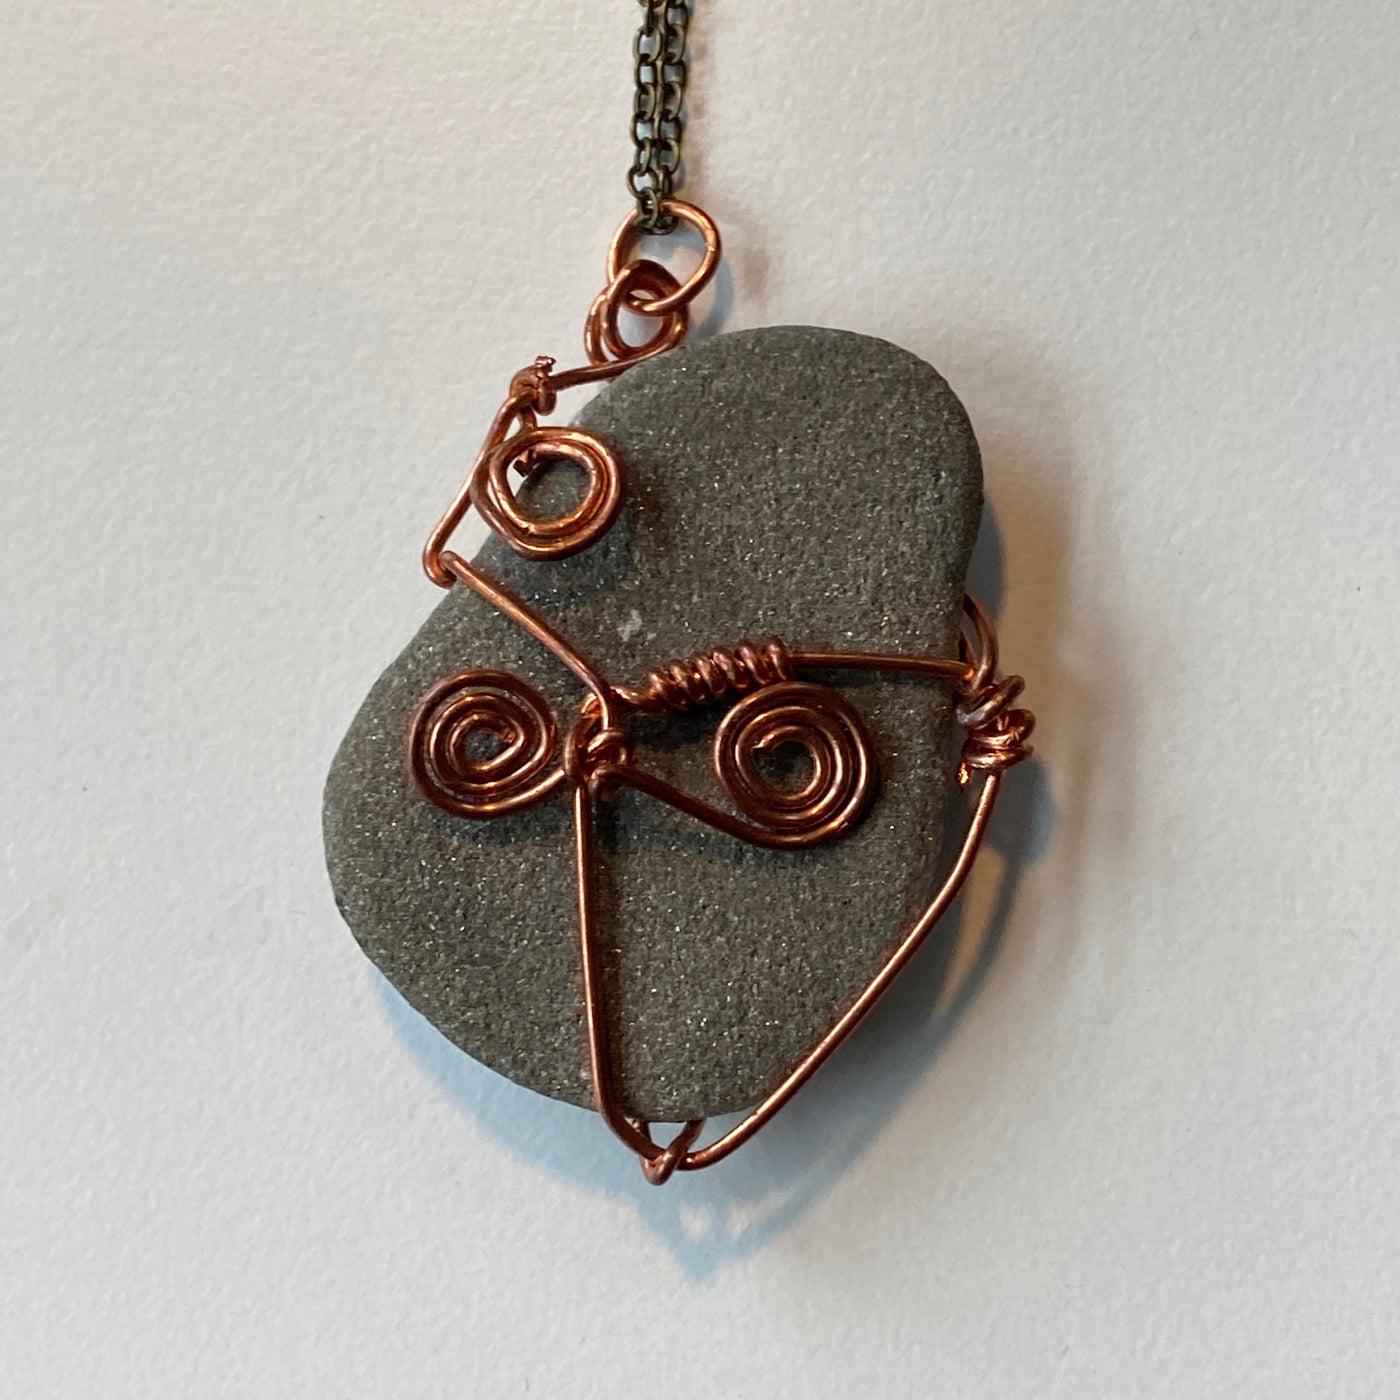 Grey natural stone and wire pendant. Flat Elbastones